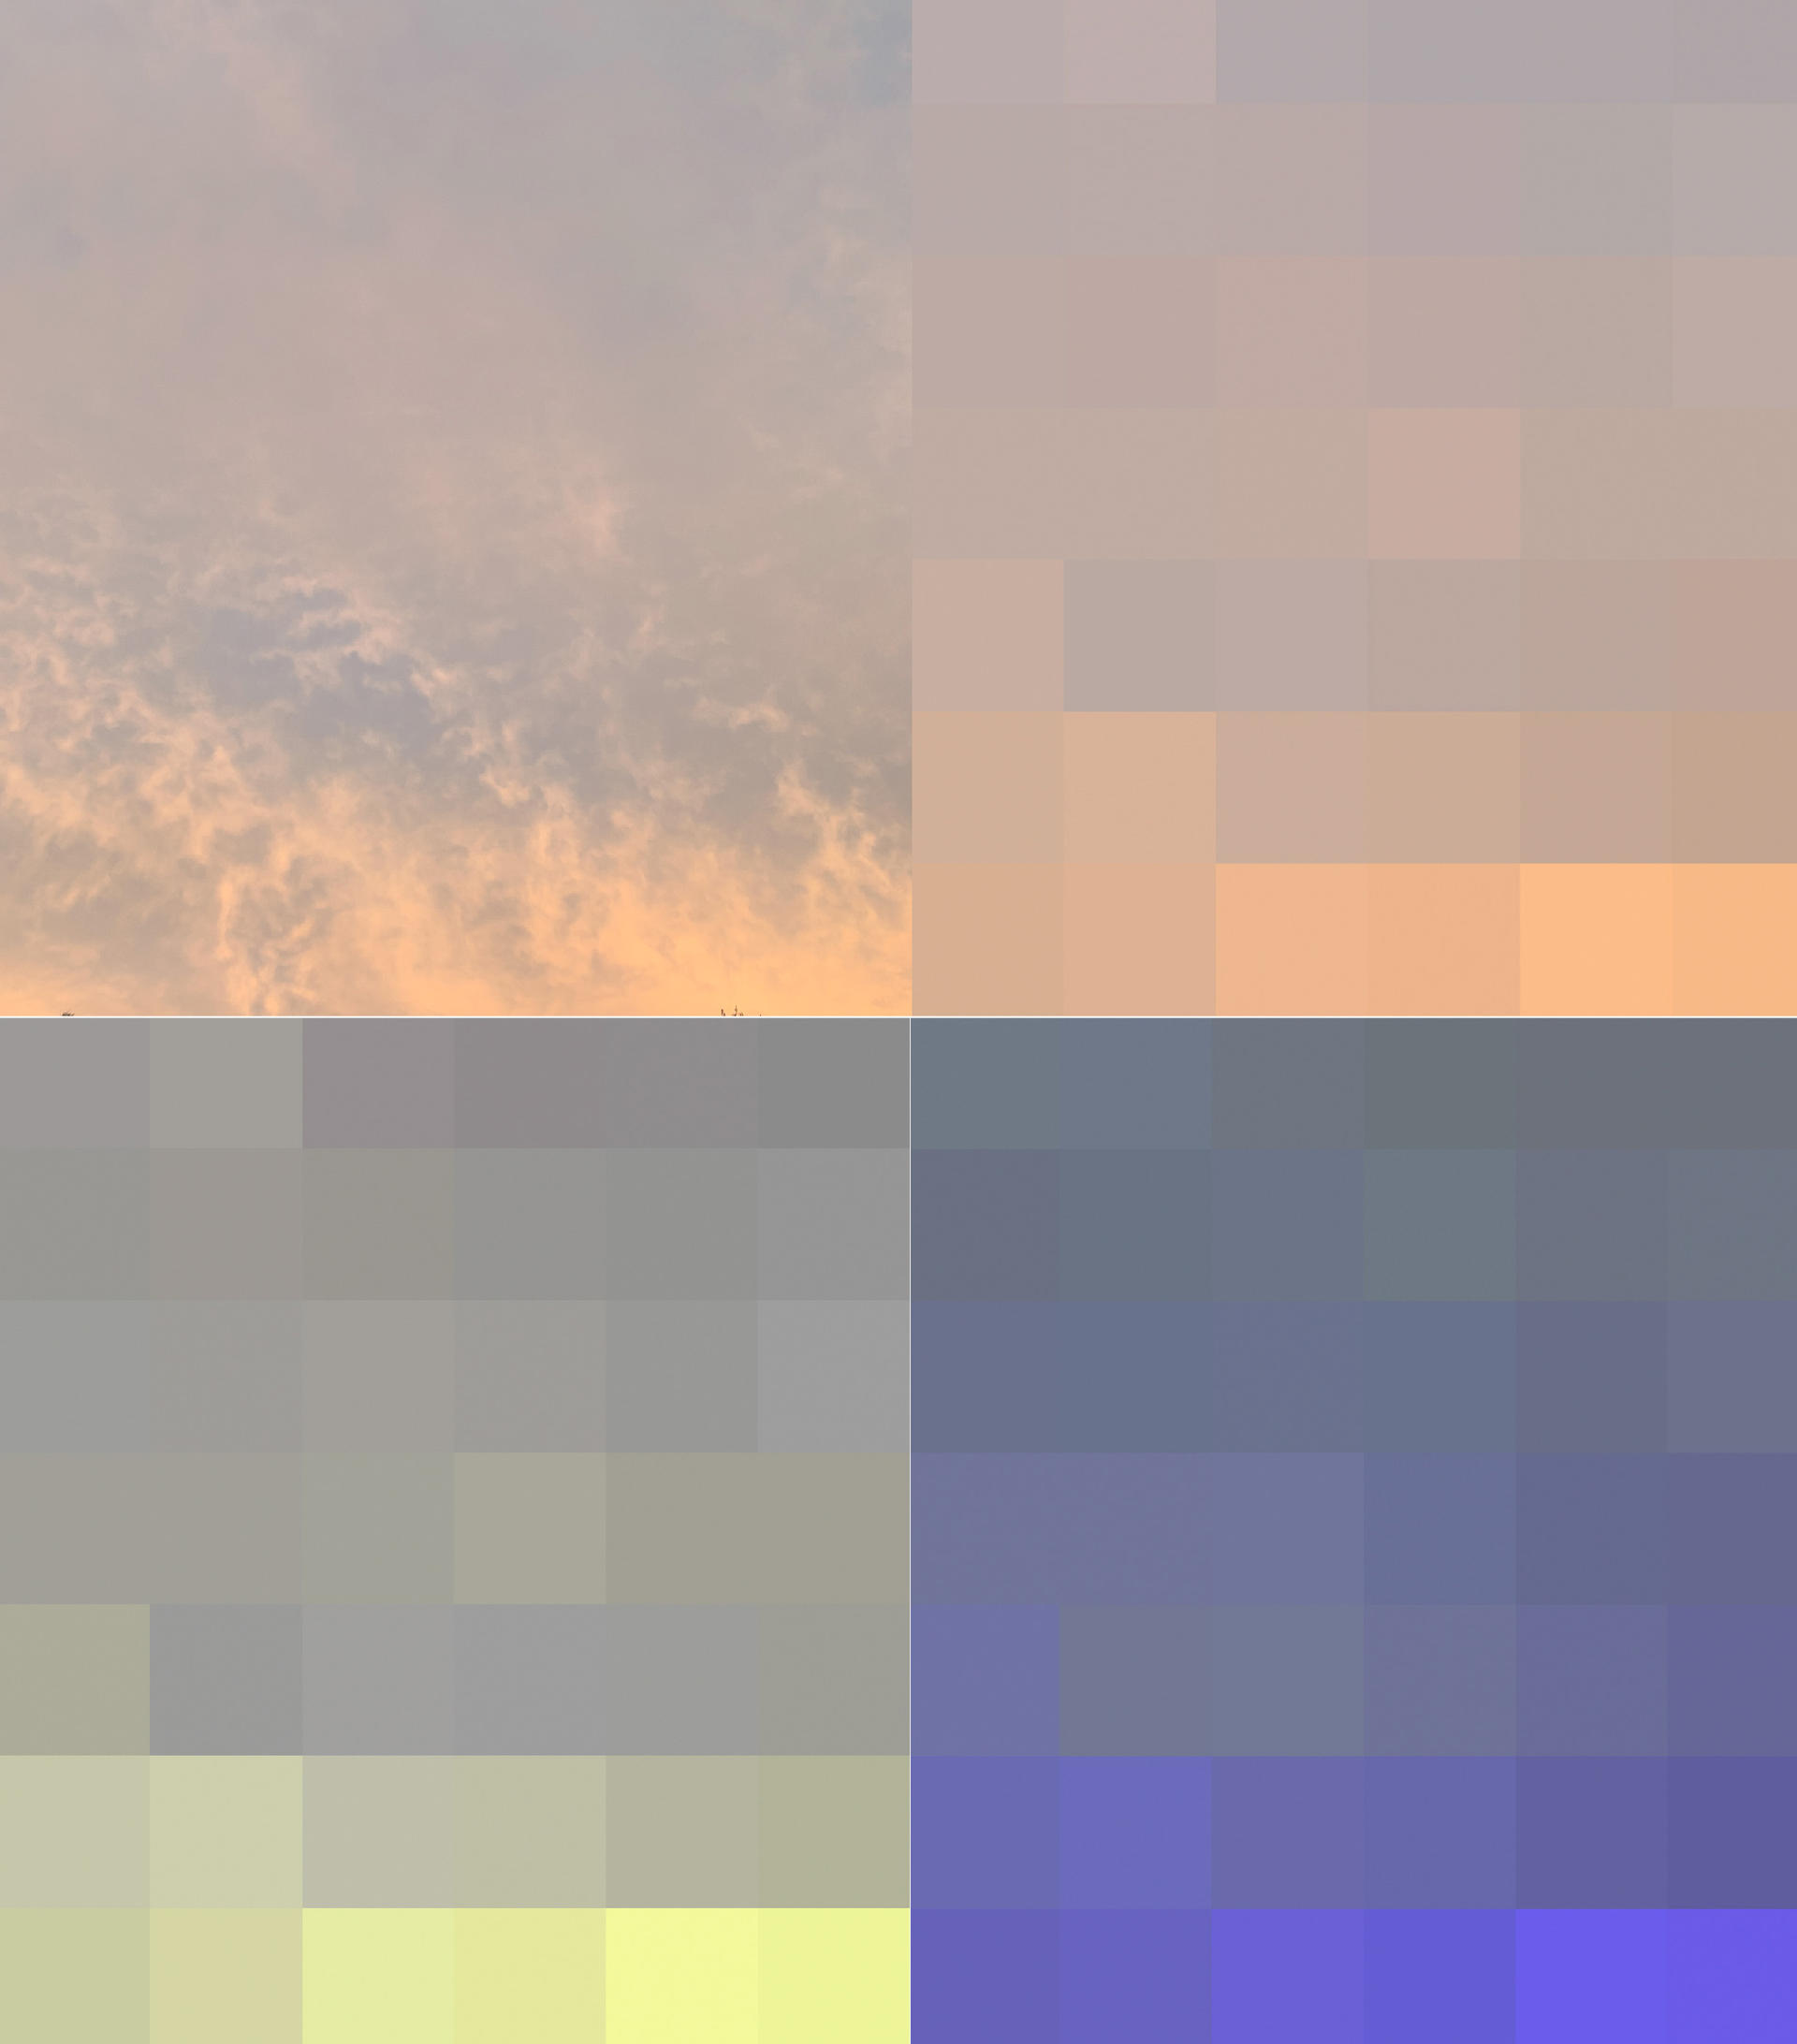 Grids that ombre like the image of the sky in 3 colorways.